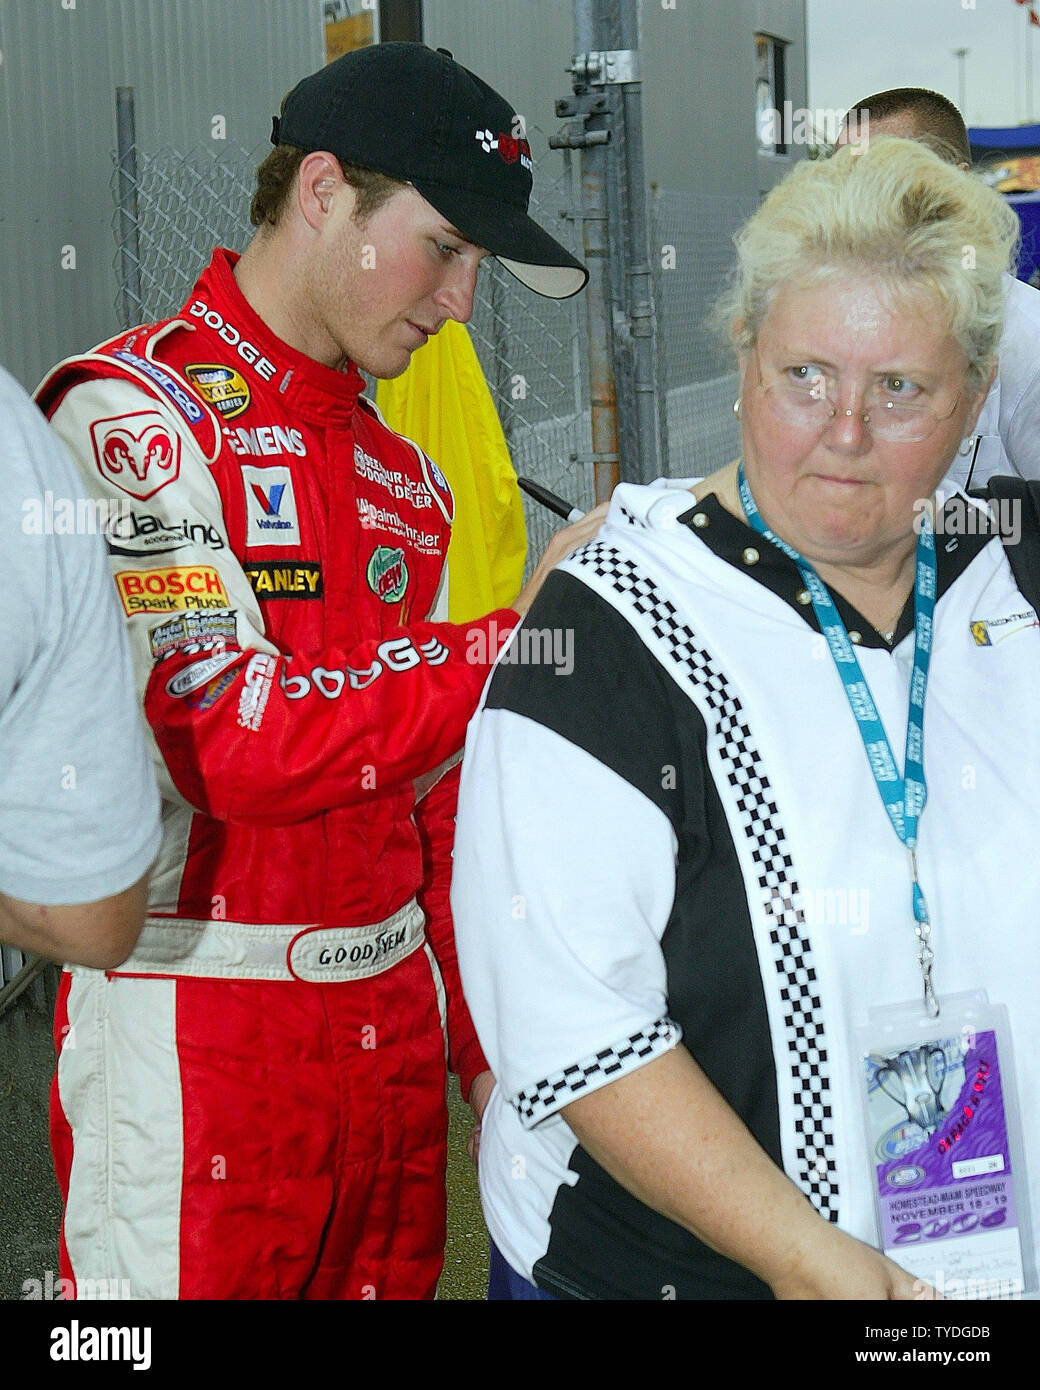 NASCAR Nextel Cup driver Kasey Kahne signs Connie Logue's shirt, in the garage area at the Homestead-Miami Speedway, in Homestead,  Florida on November 18, 2005.  (UPI Photo/Michael Bush) Stock Photo